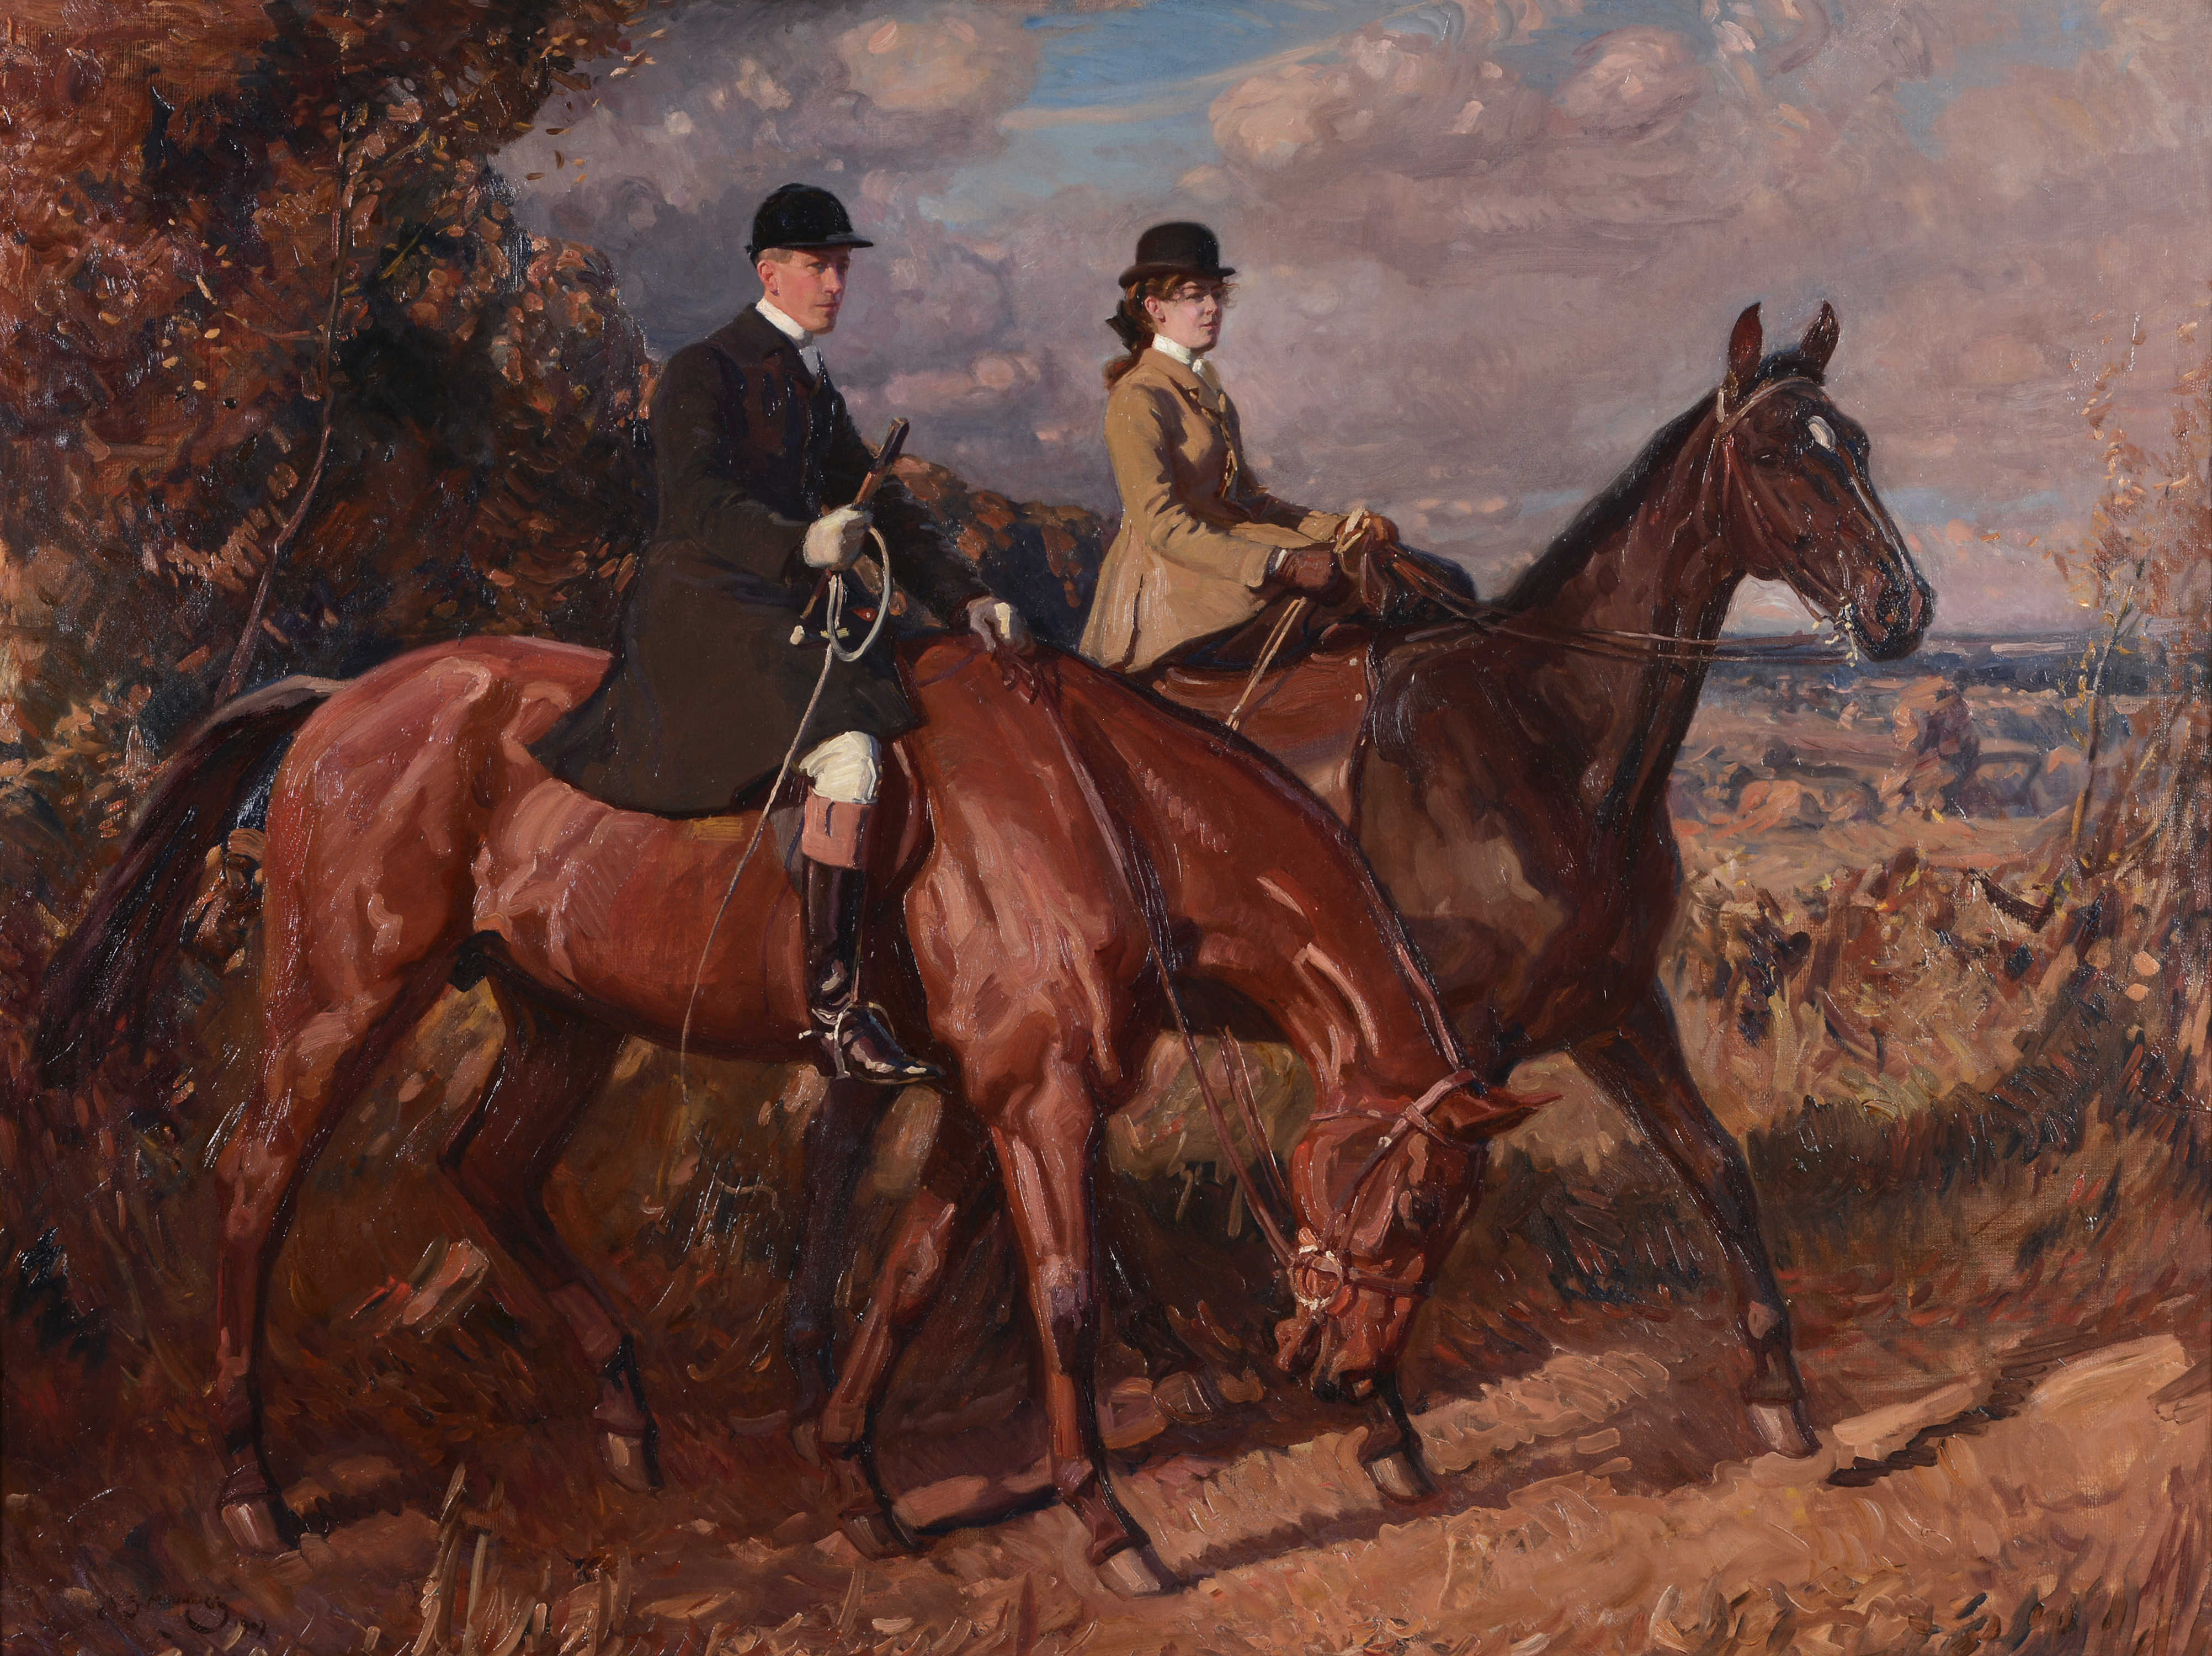 Sir Alfred James Munnings (1878-1959) ‘Going to The Meet, Captain. F.G. Chamberlin and his sister on Household Heath, Norwich,’ oil on canvas, signed and dated A.J. Munnings 1907 lower left, 127 x 167 cm. (50 x 65 1/2 in). Dreweatts & Bloomsbury Auctions image